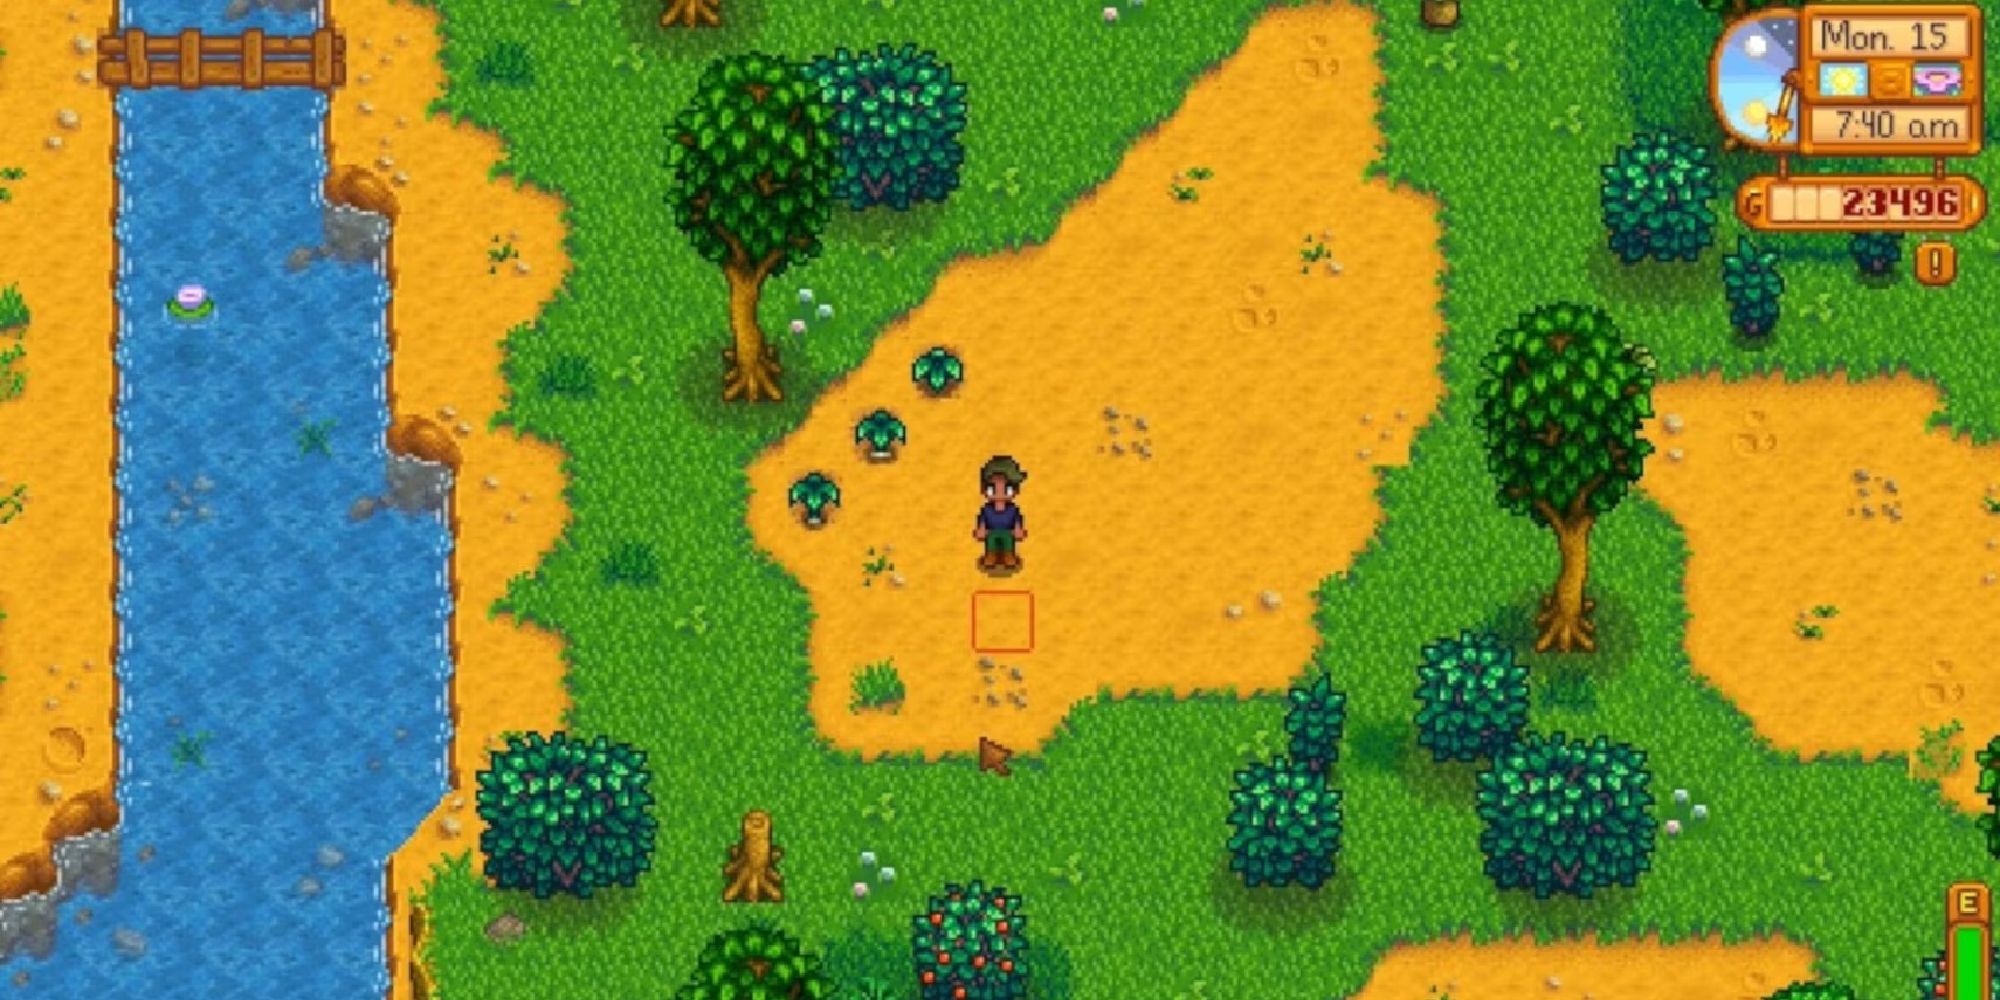 player standing near wild spring onion patch